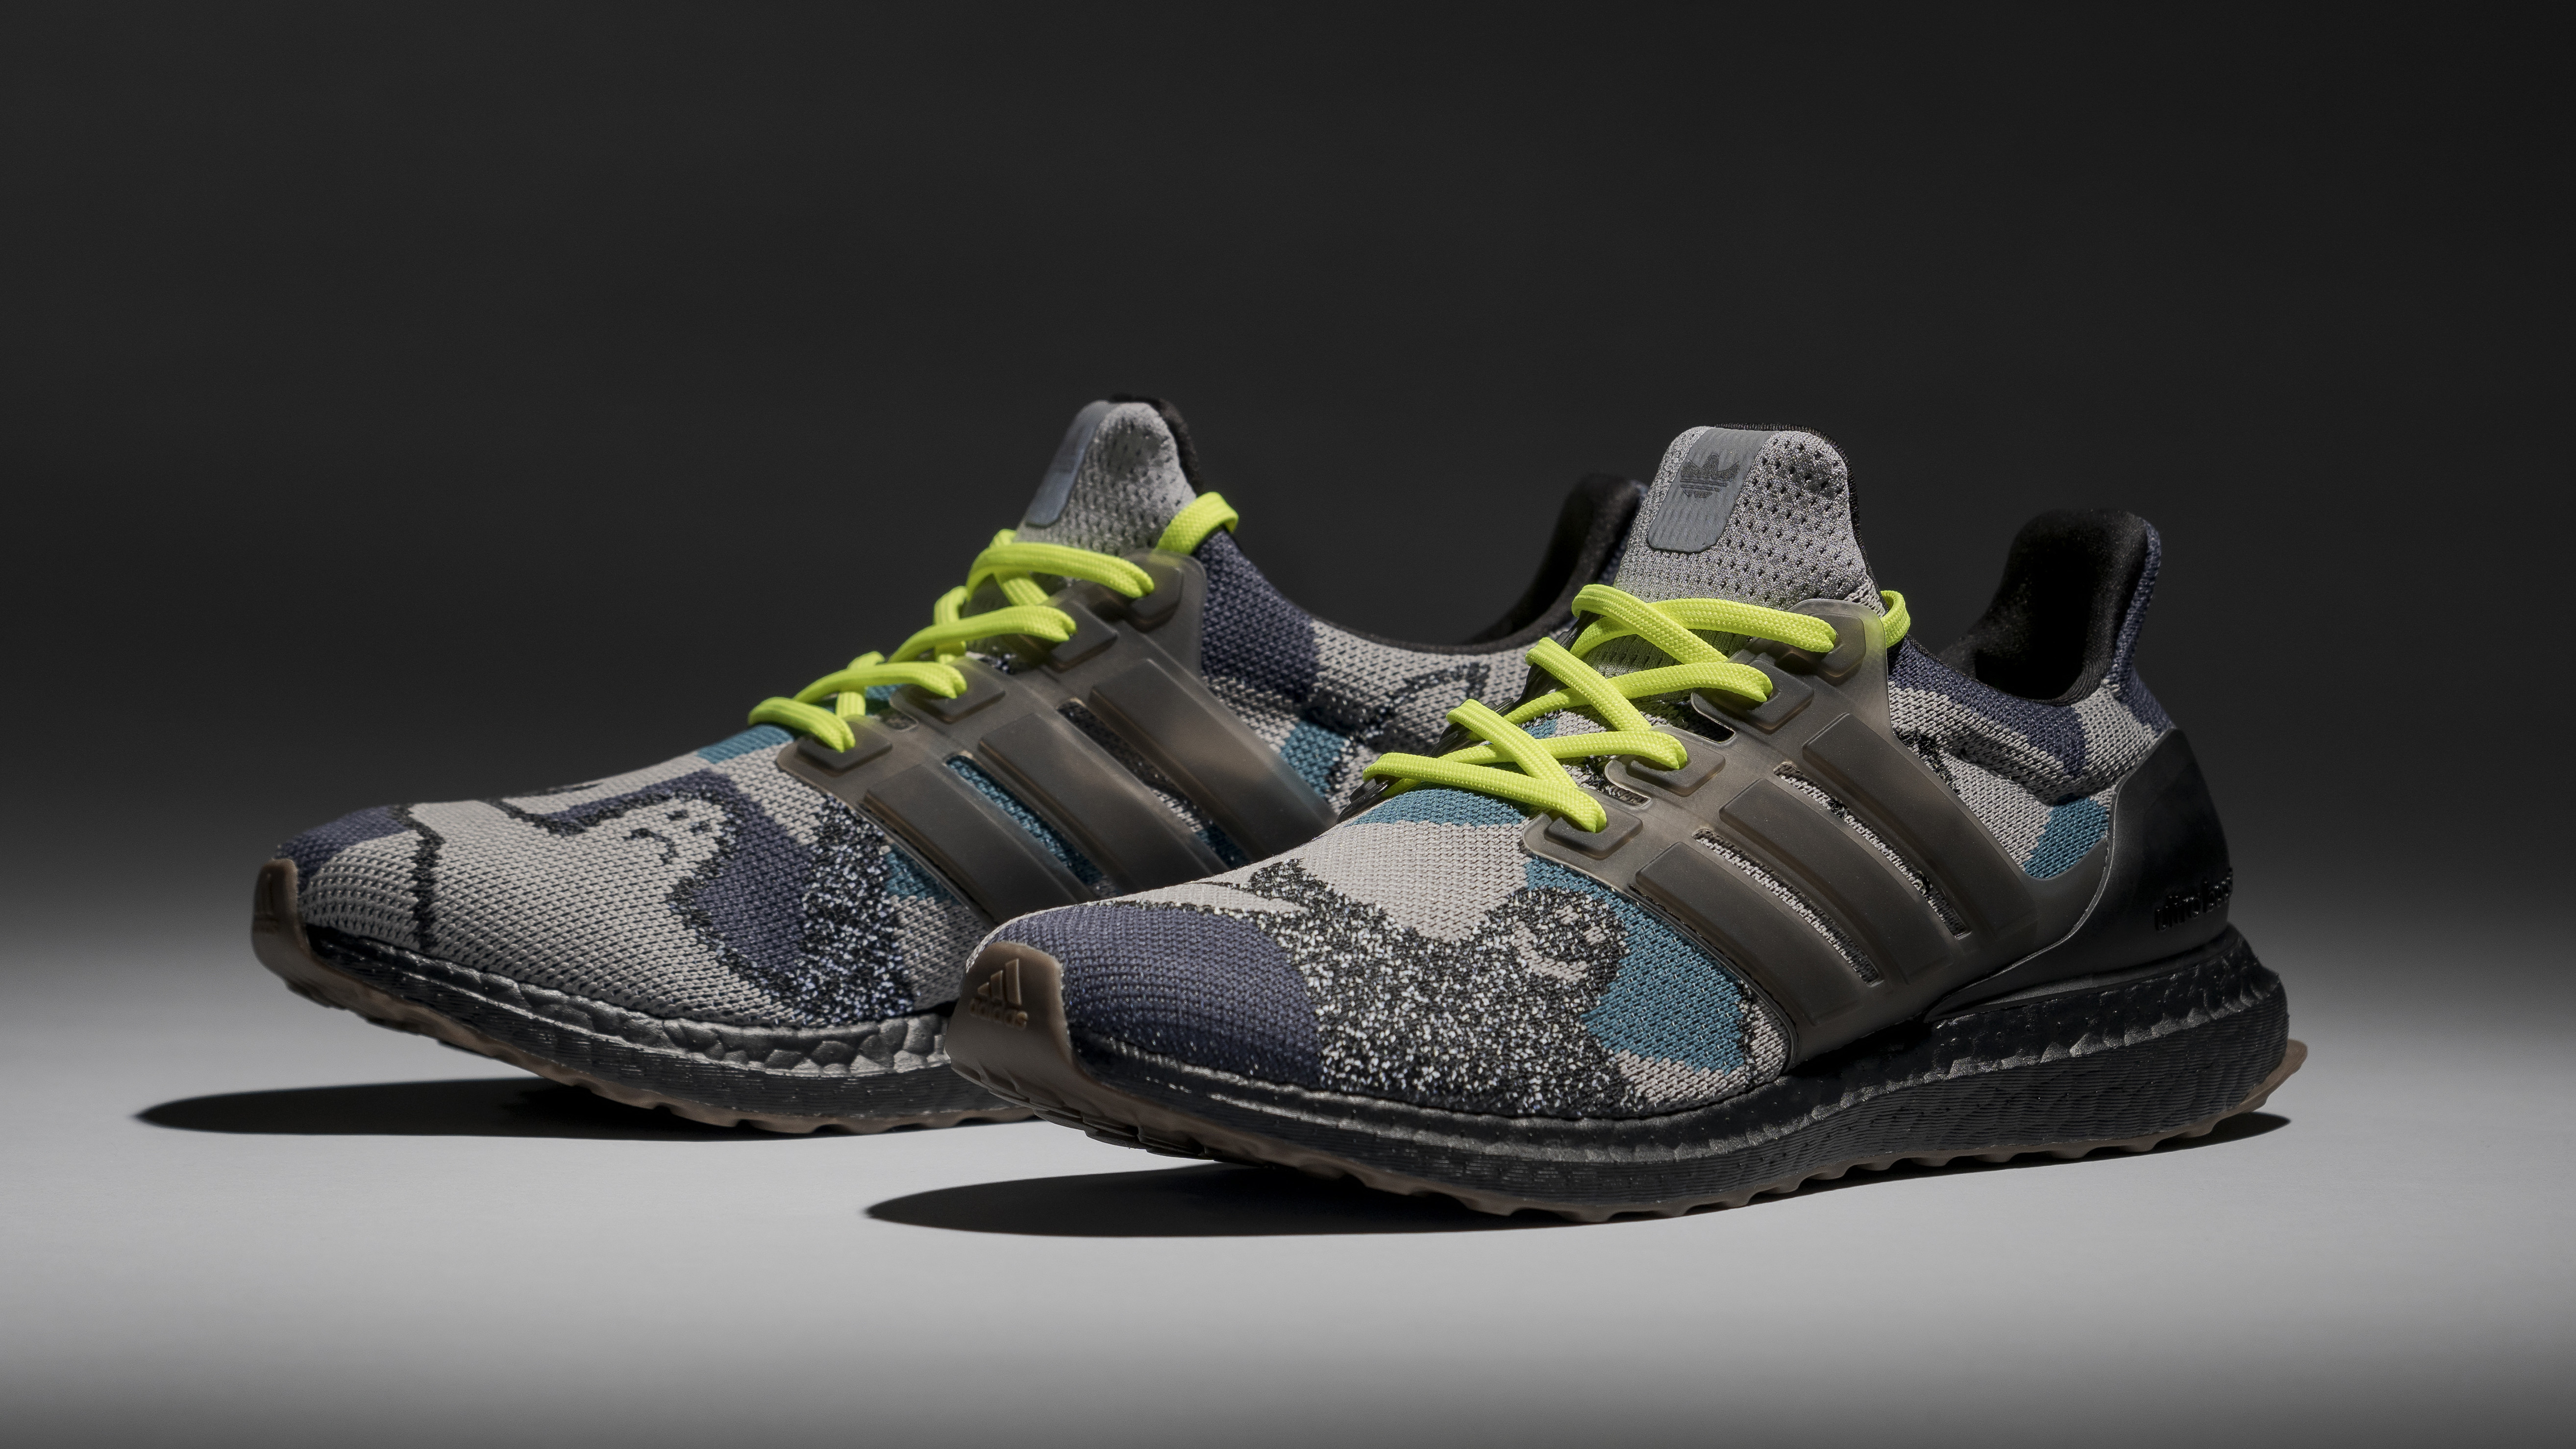 Poetry Sentimental Cheetah Mark Gonzales x Adidas Ultra Boost DNA Release Date | Sole Collector